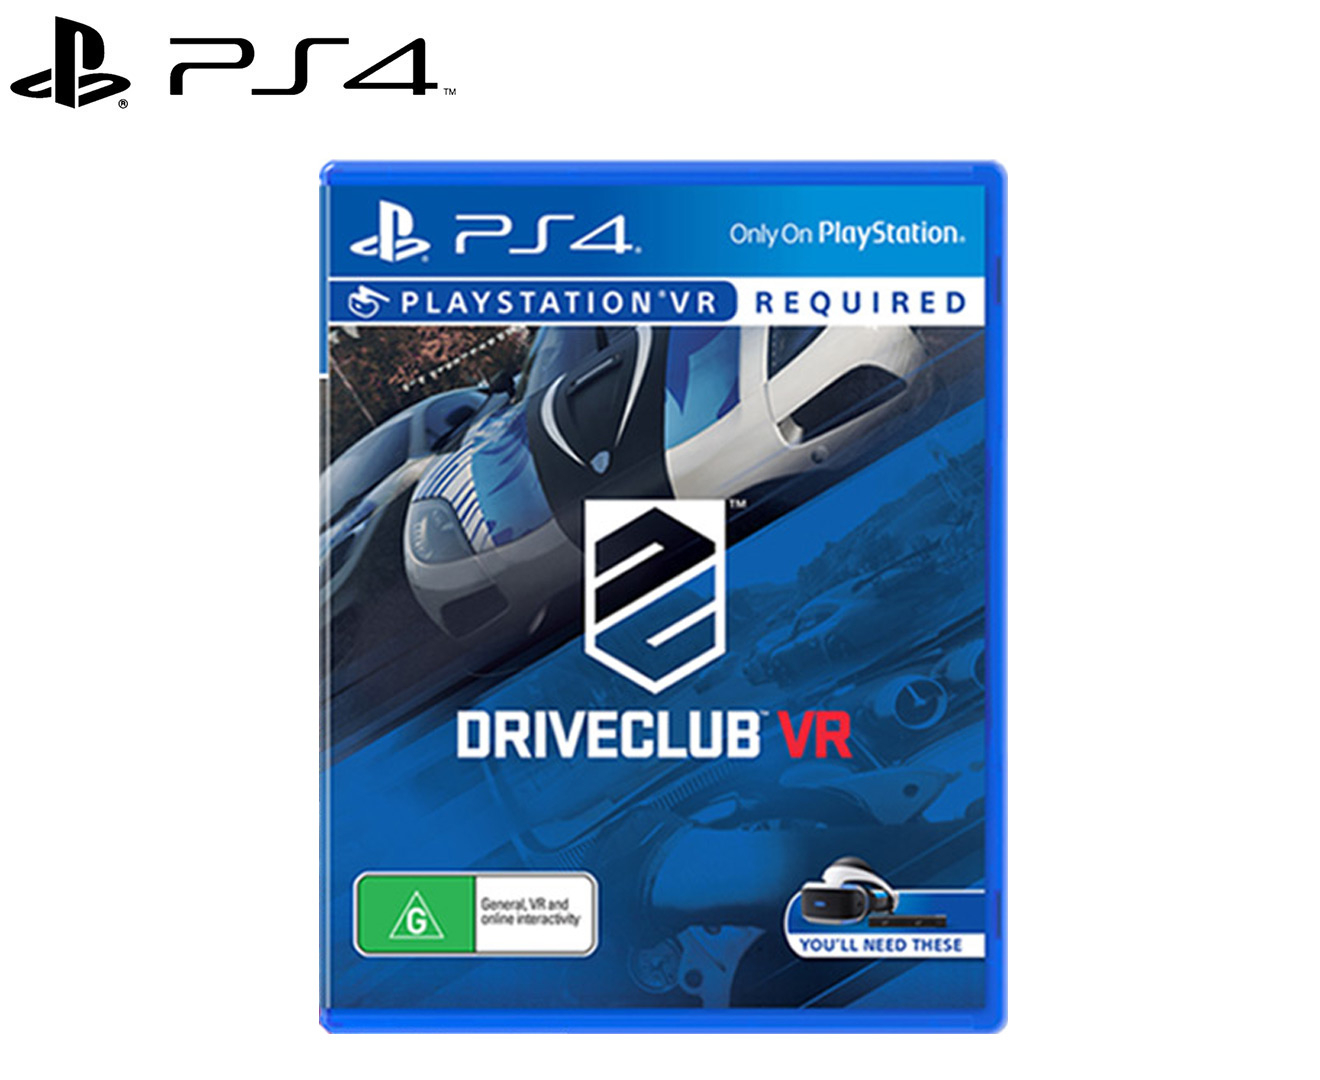 Driveclub vr part 1 release